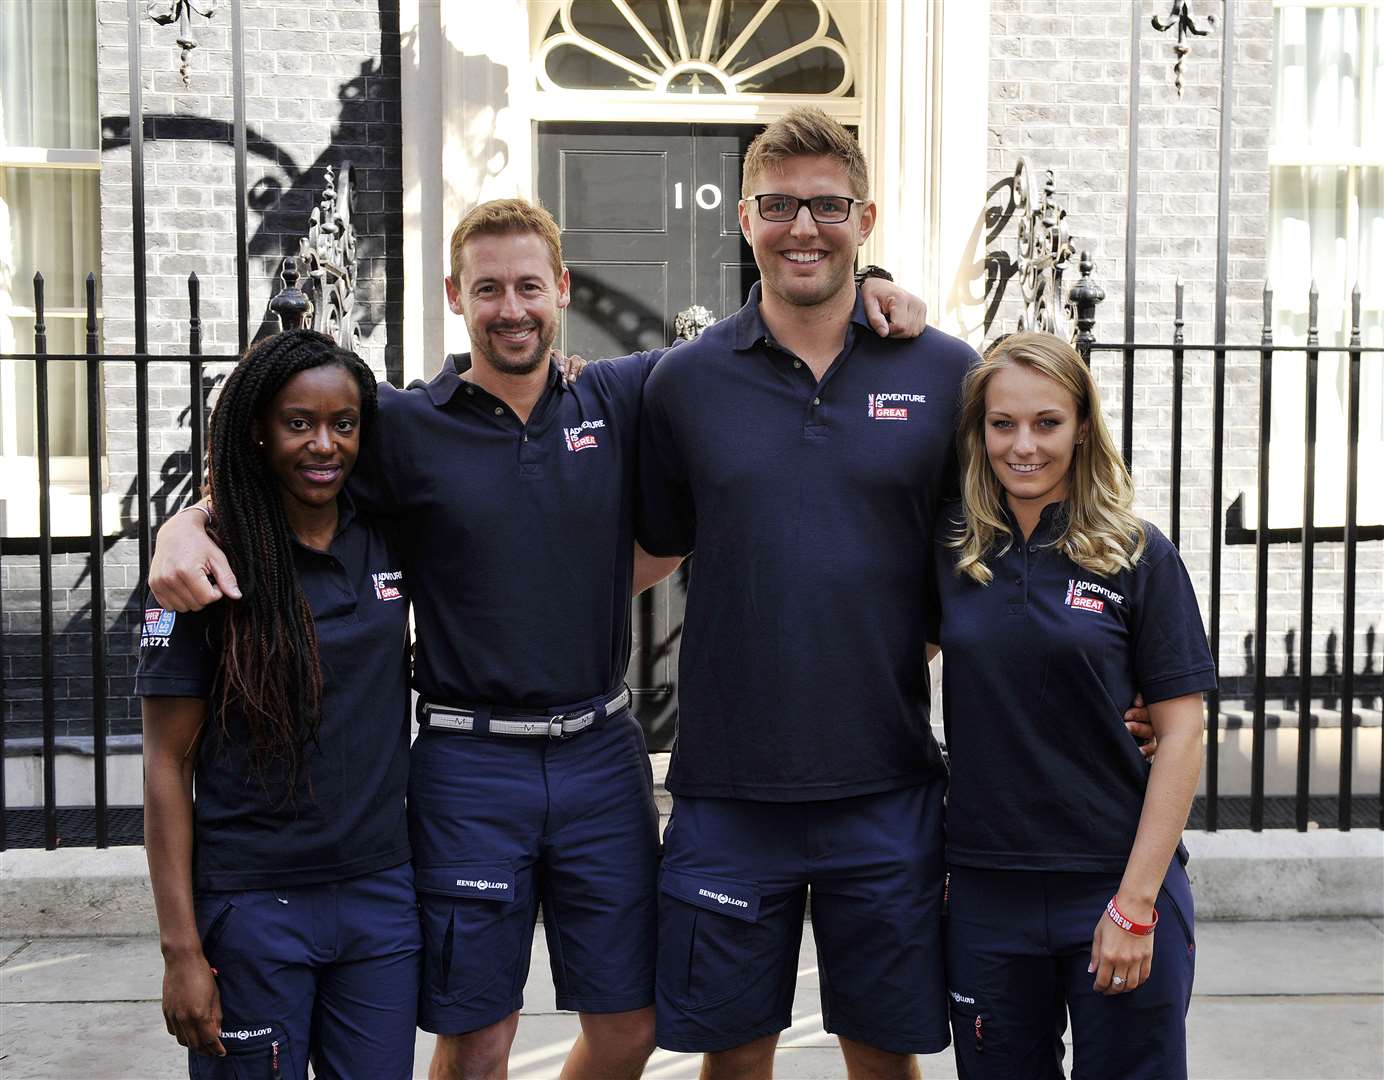 Charlotte Evans at the launch of world yacht challenge outside 10 Downing Street